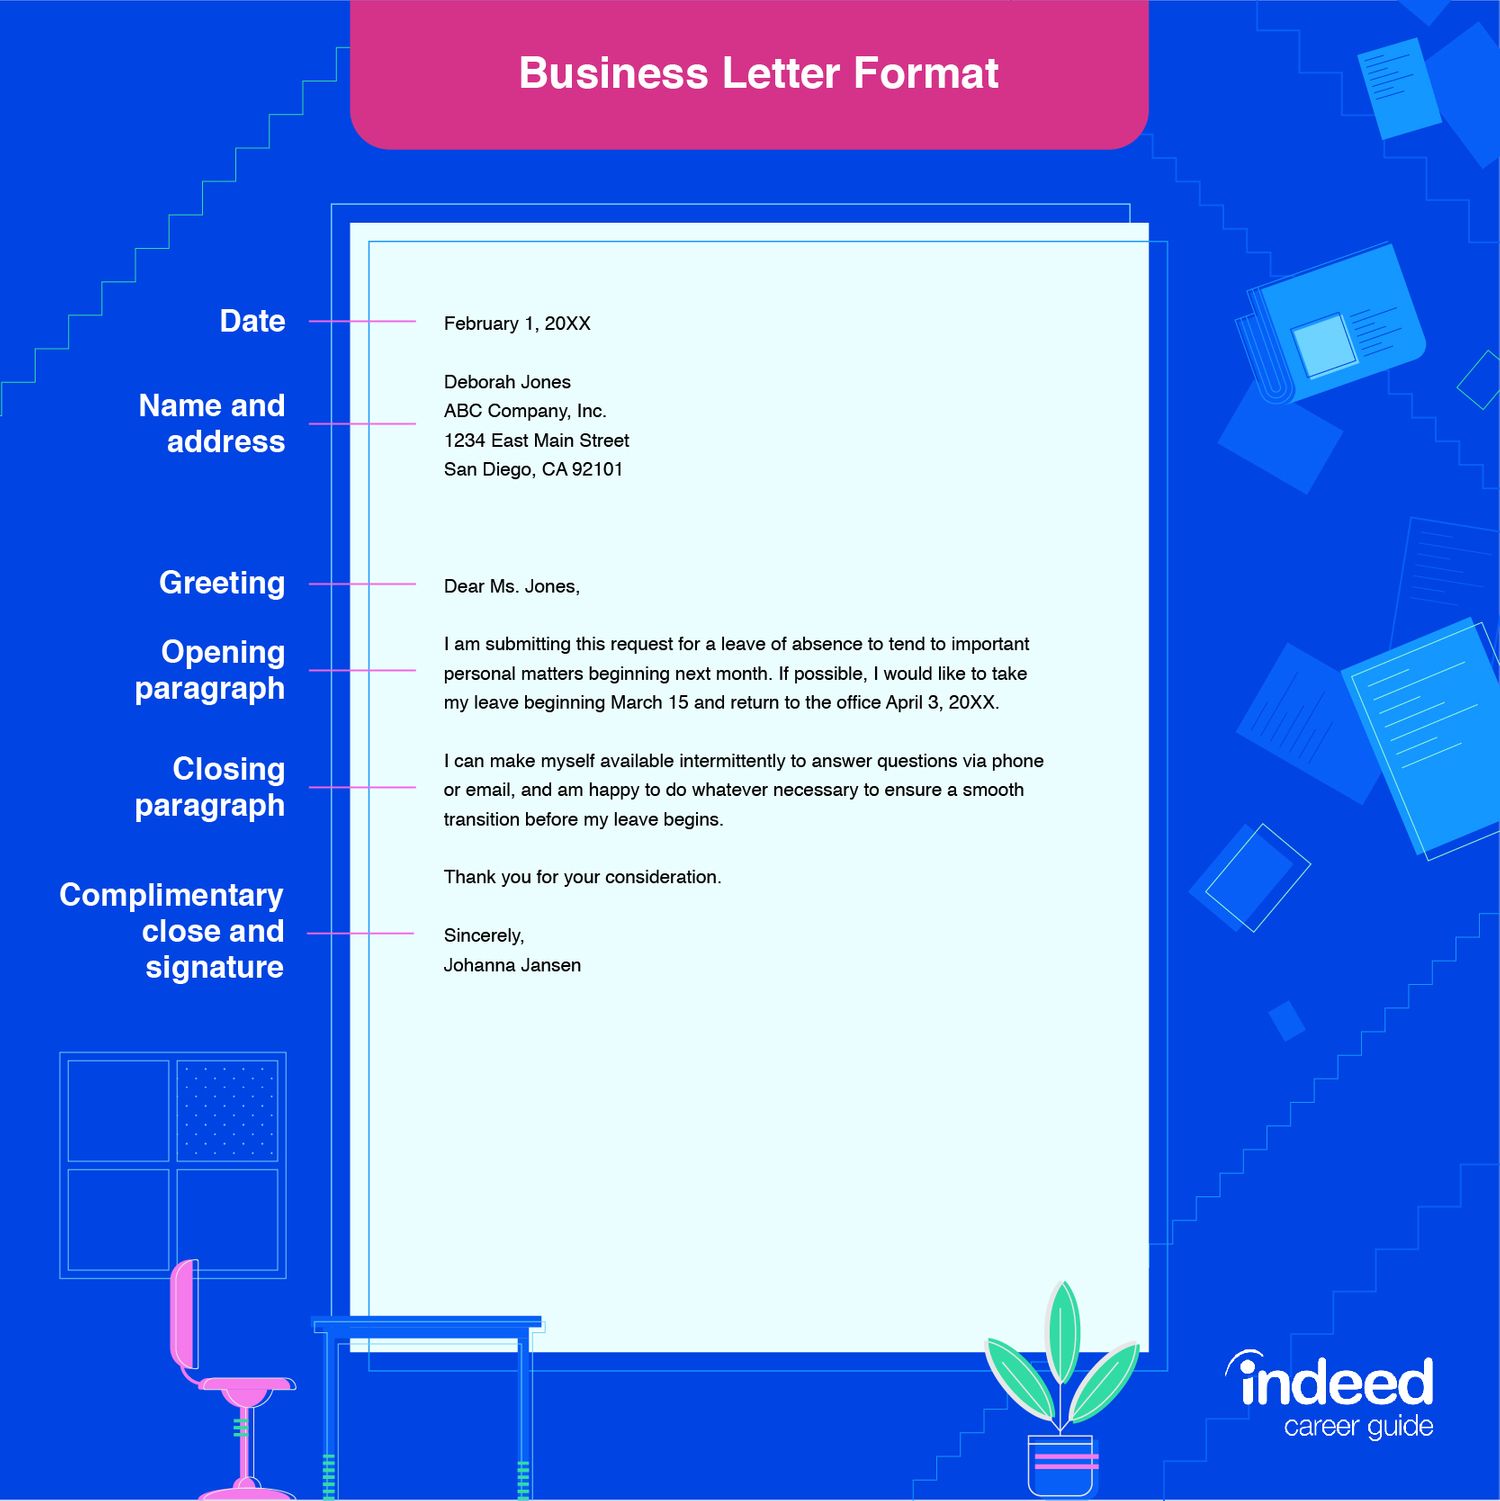 how to cc a business letter to multiple parties investing